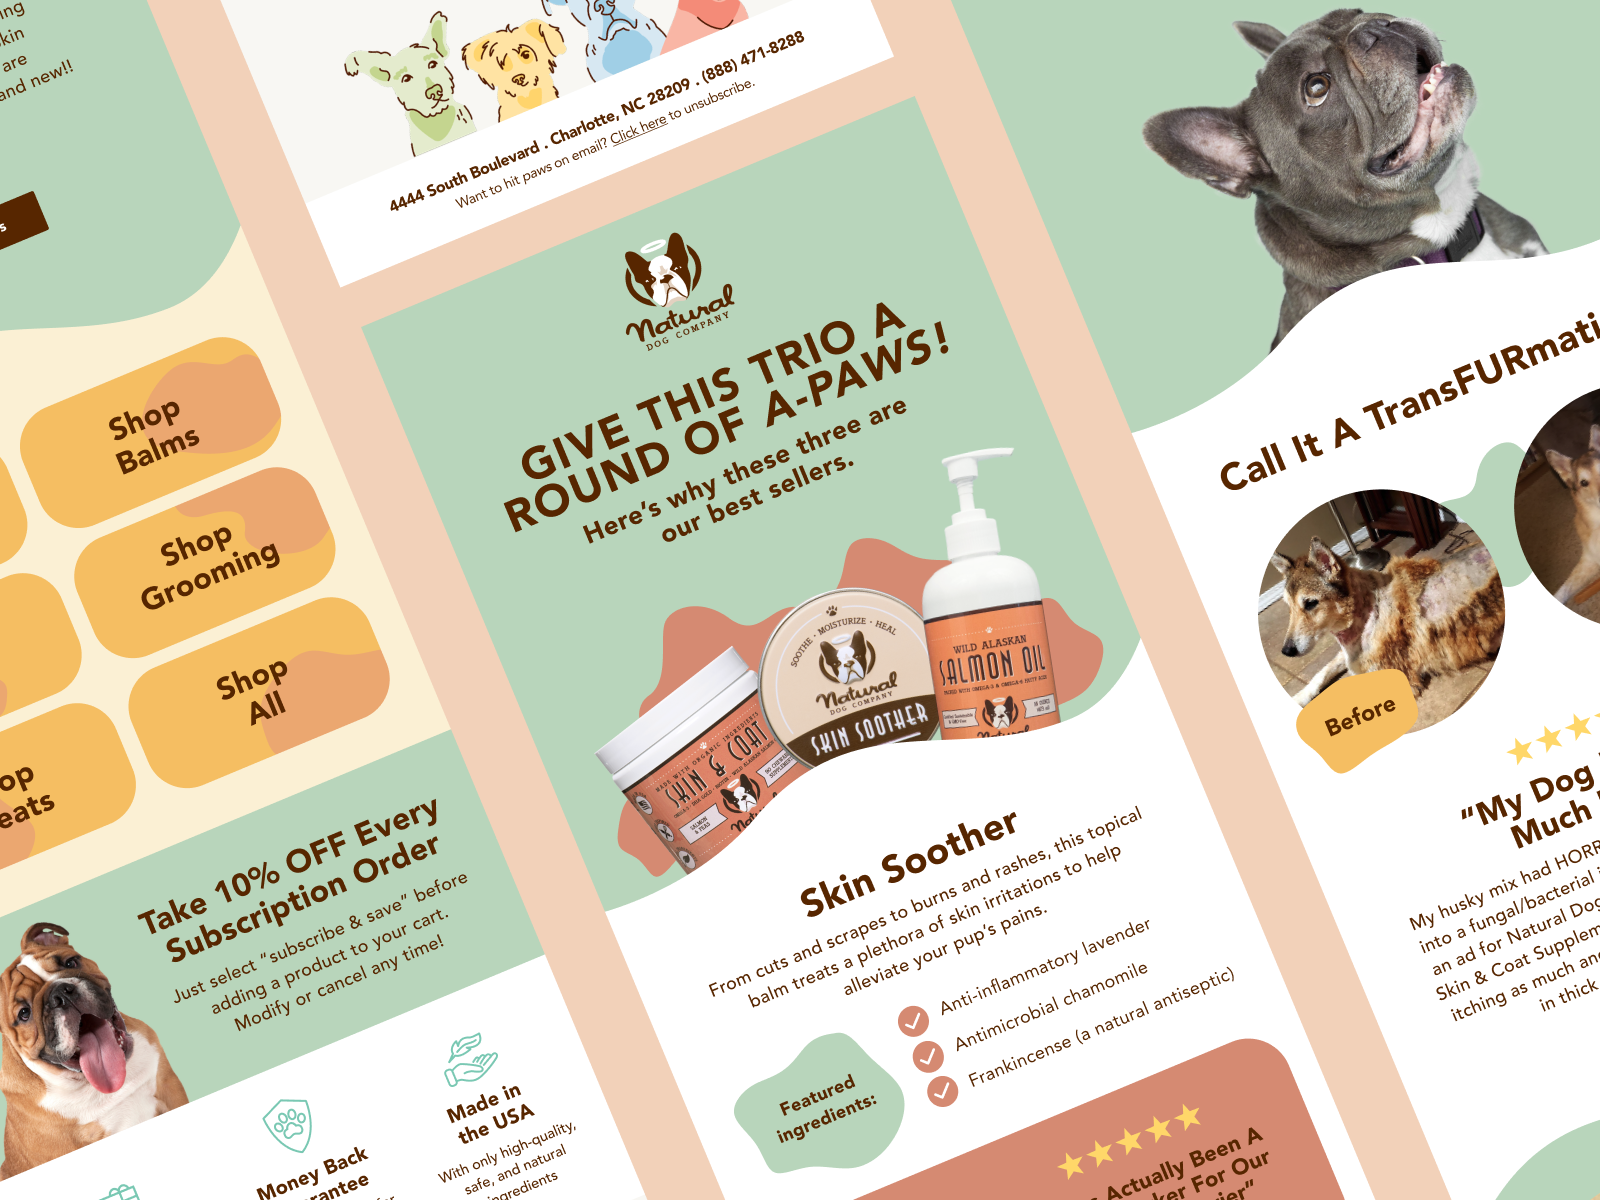 Screenshots of email campaigns from Natural Dog Company